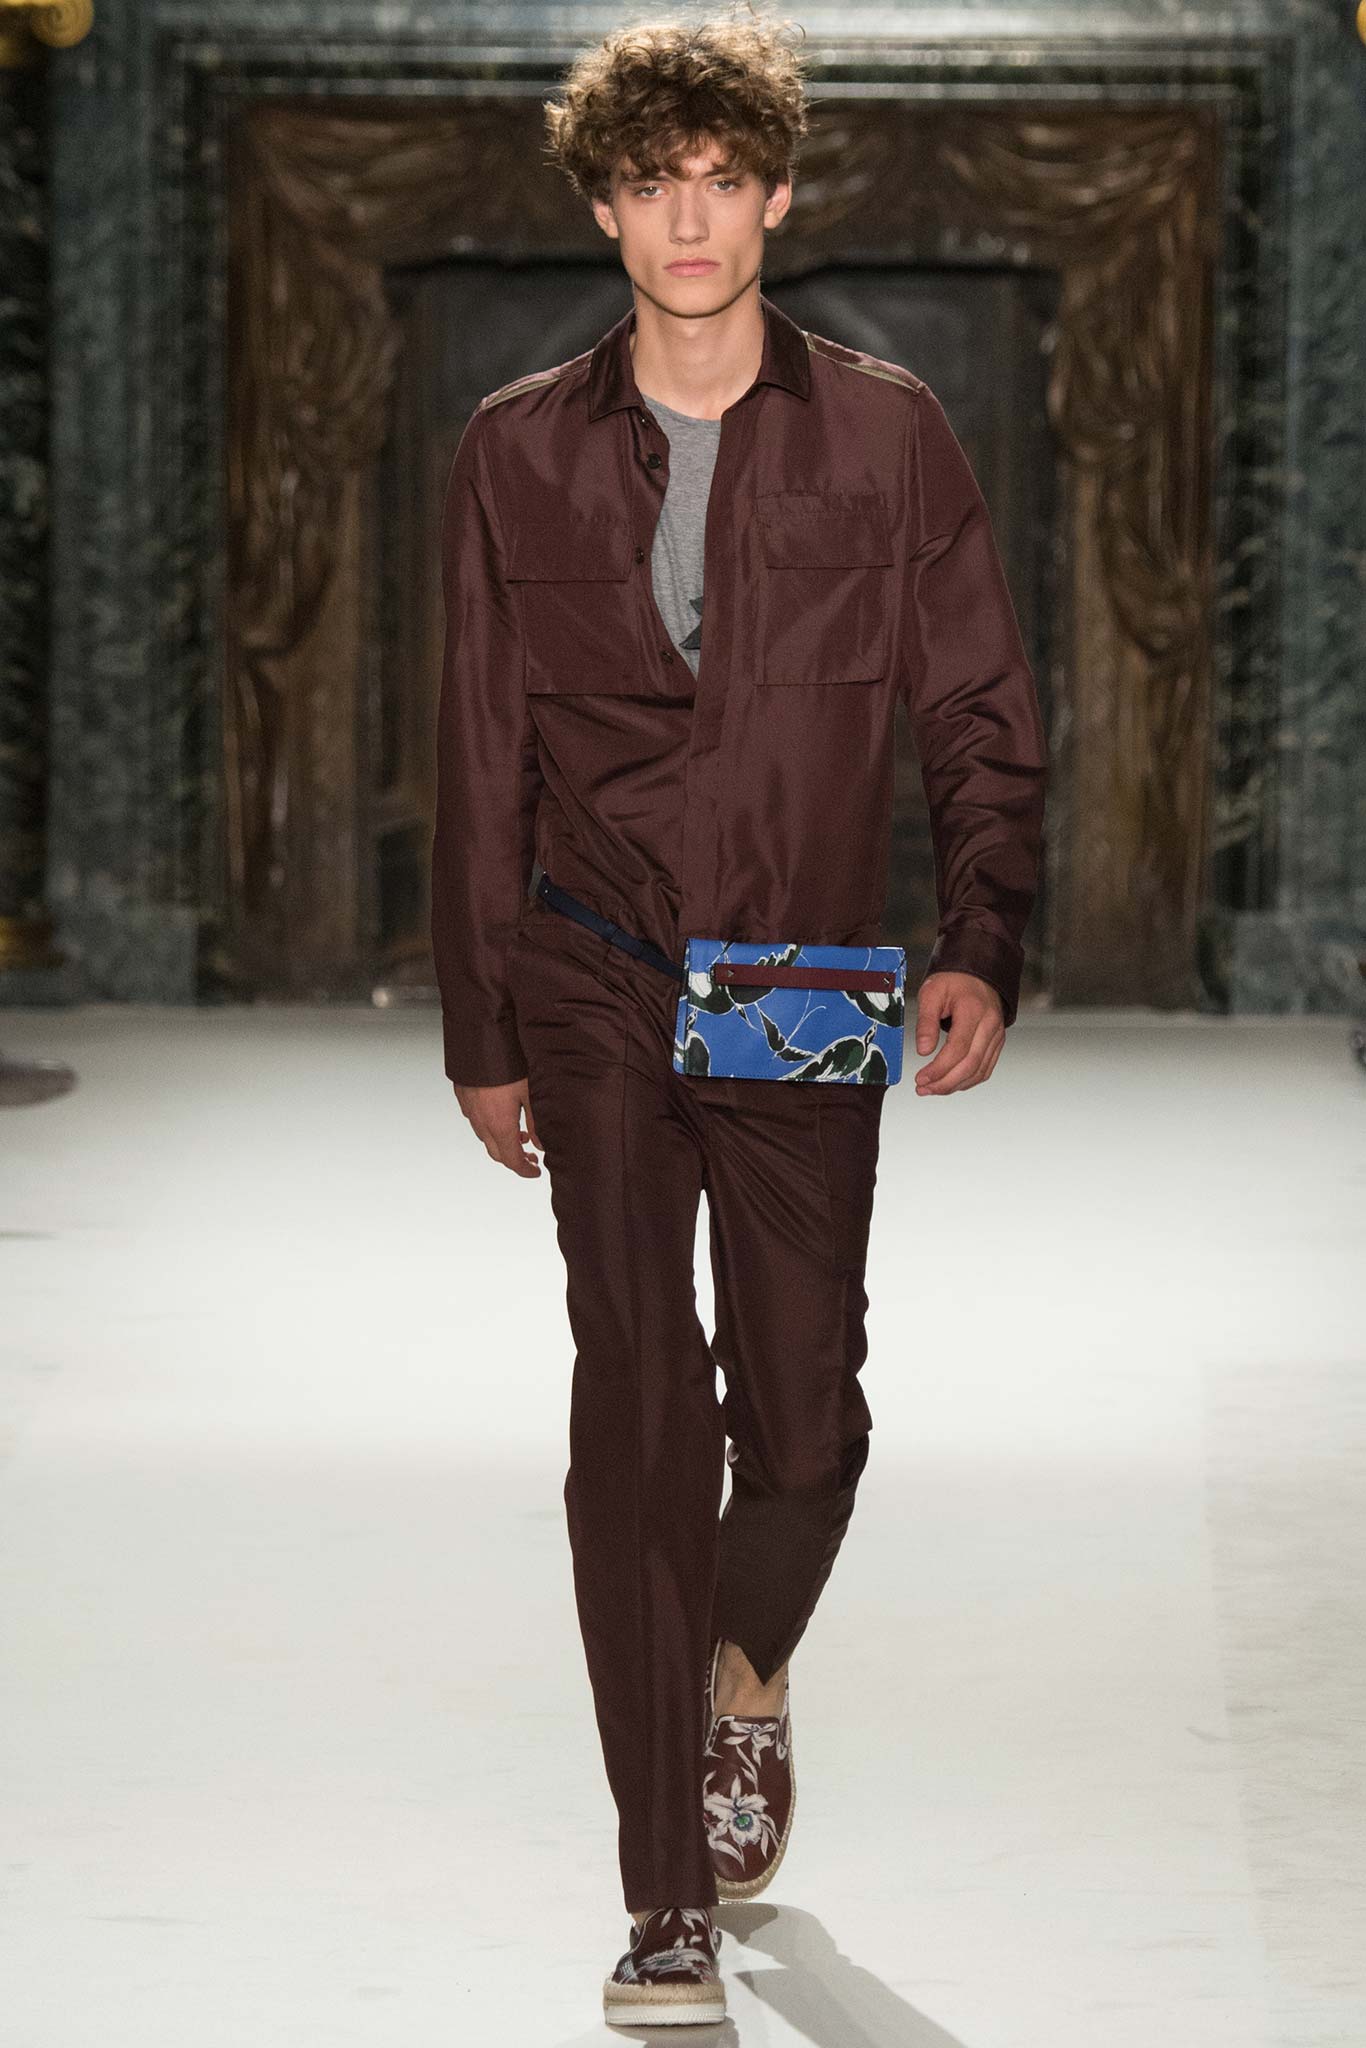 spring-2016-menswear-trends-06-jumpsuits-04